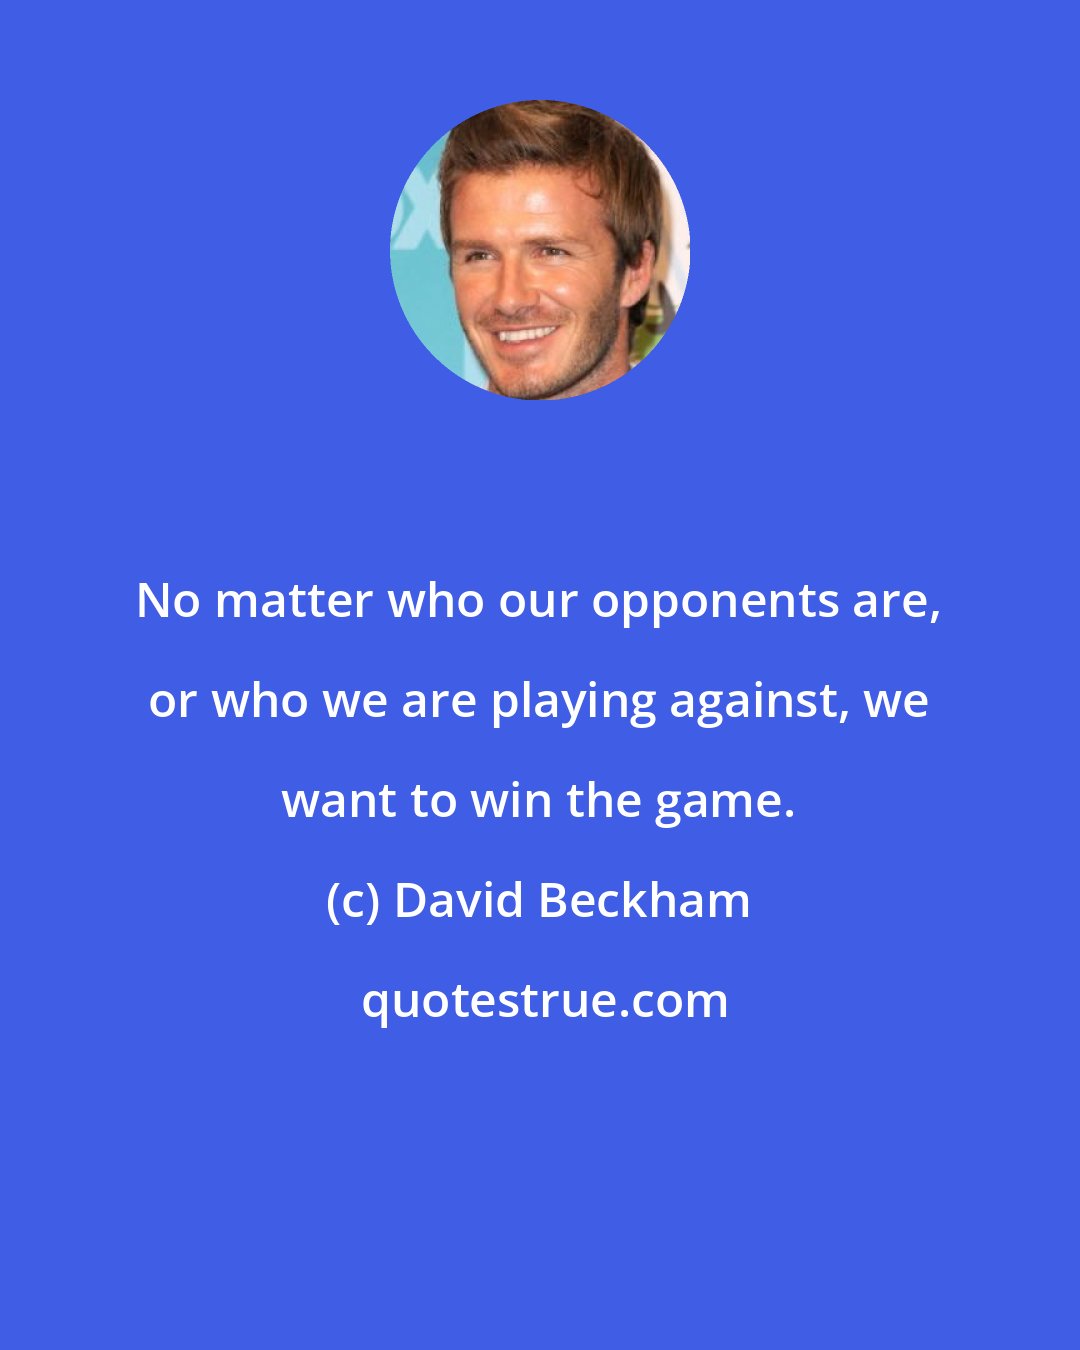 David Beckham: No matter who our opponents are, or who we are playing against, we want to win the game.